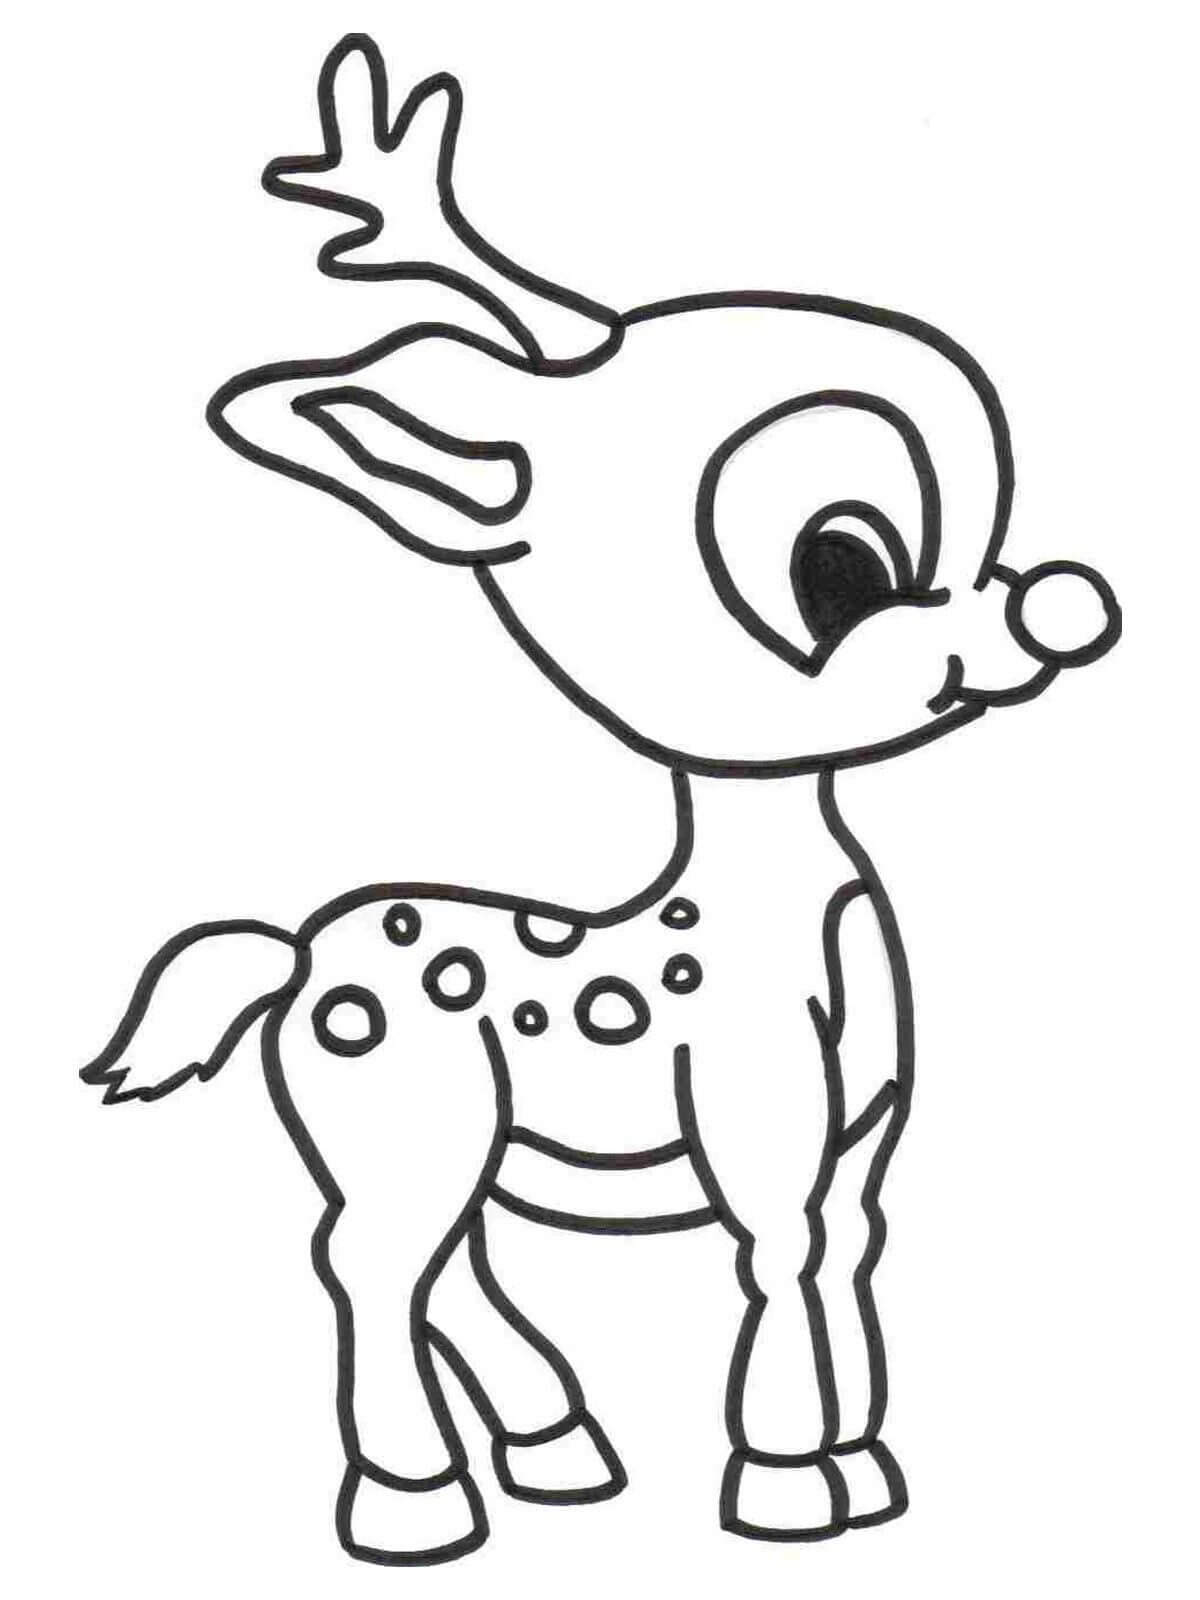 Pretty Cartoon Bambi Deer Animal - Absolutely Free Animal Coloring Pages for Kids